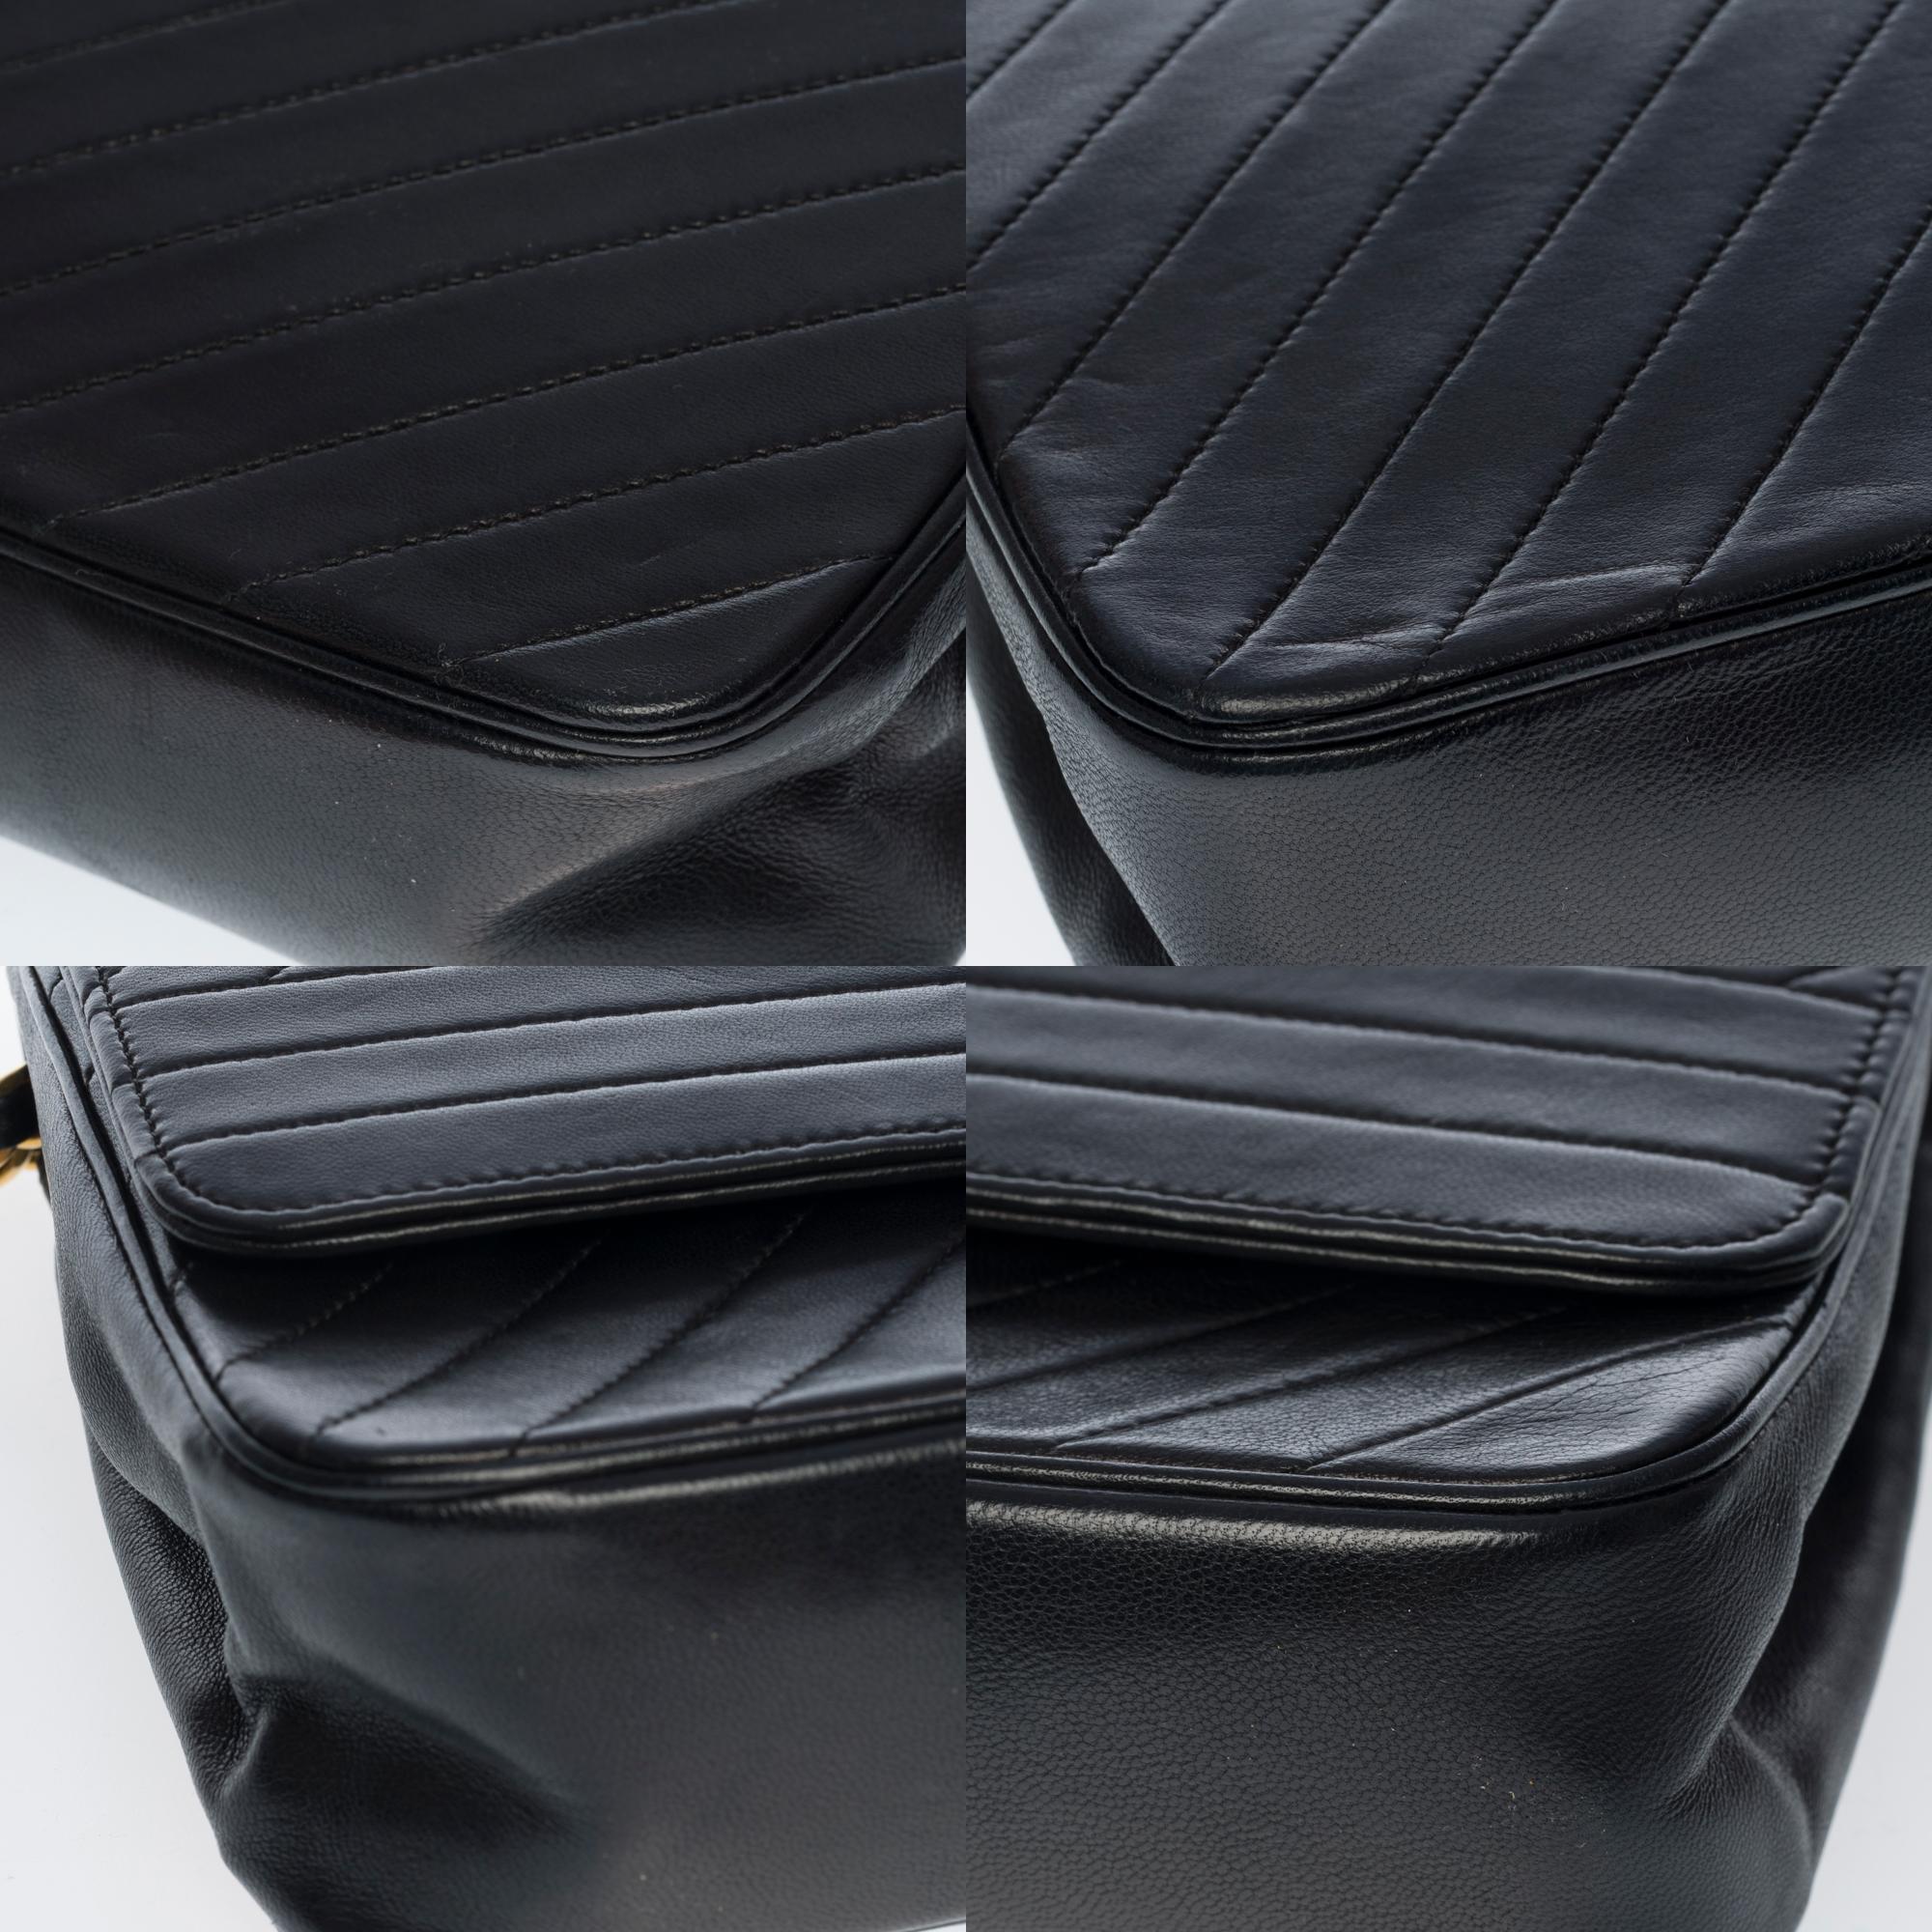 Chanel Classic shoulder bag in black quilted leather with herringbone , GHW 4